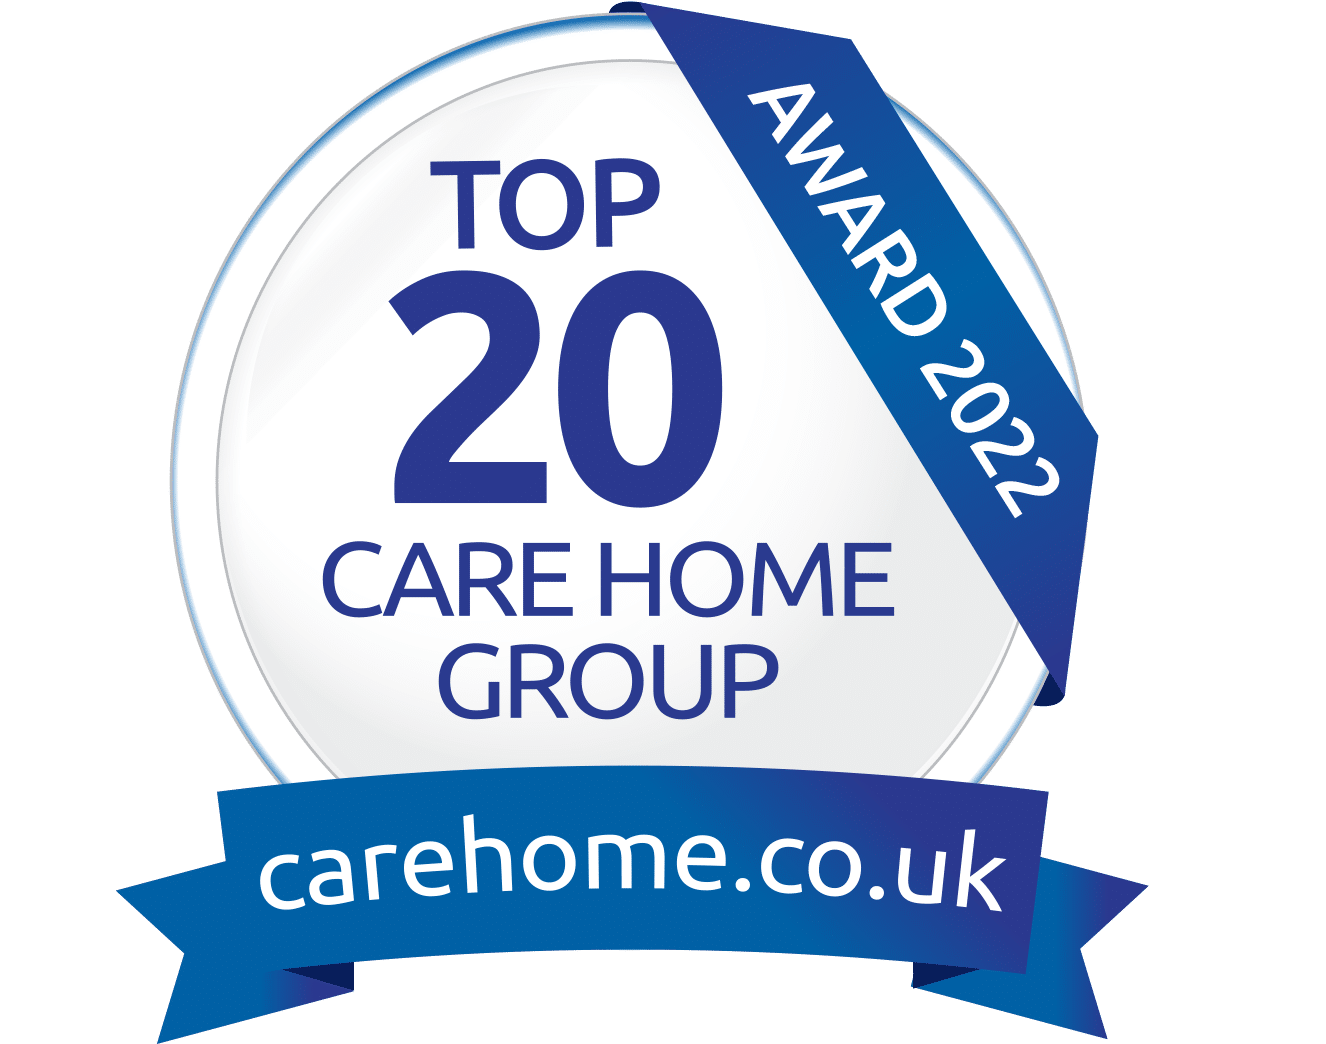 Top 20 care home group 2022